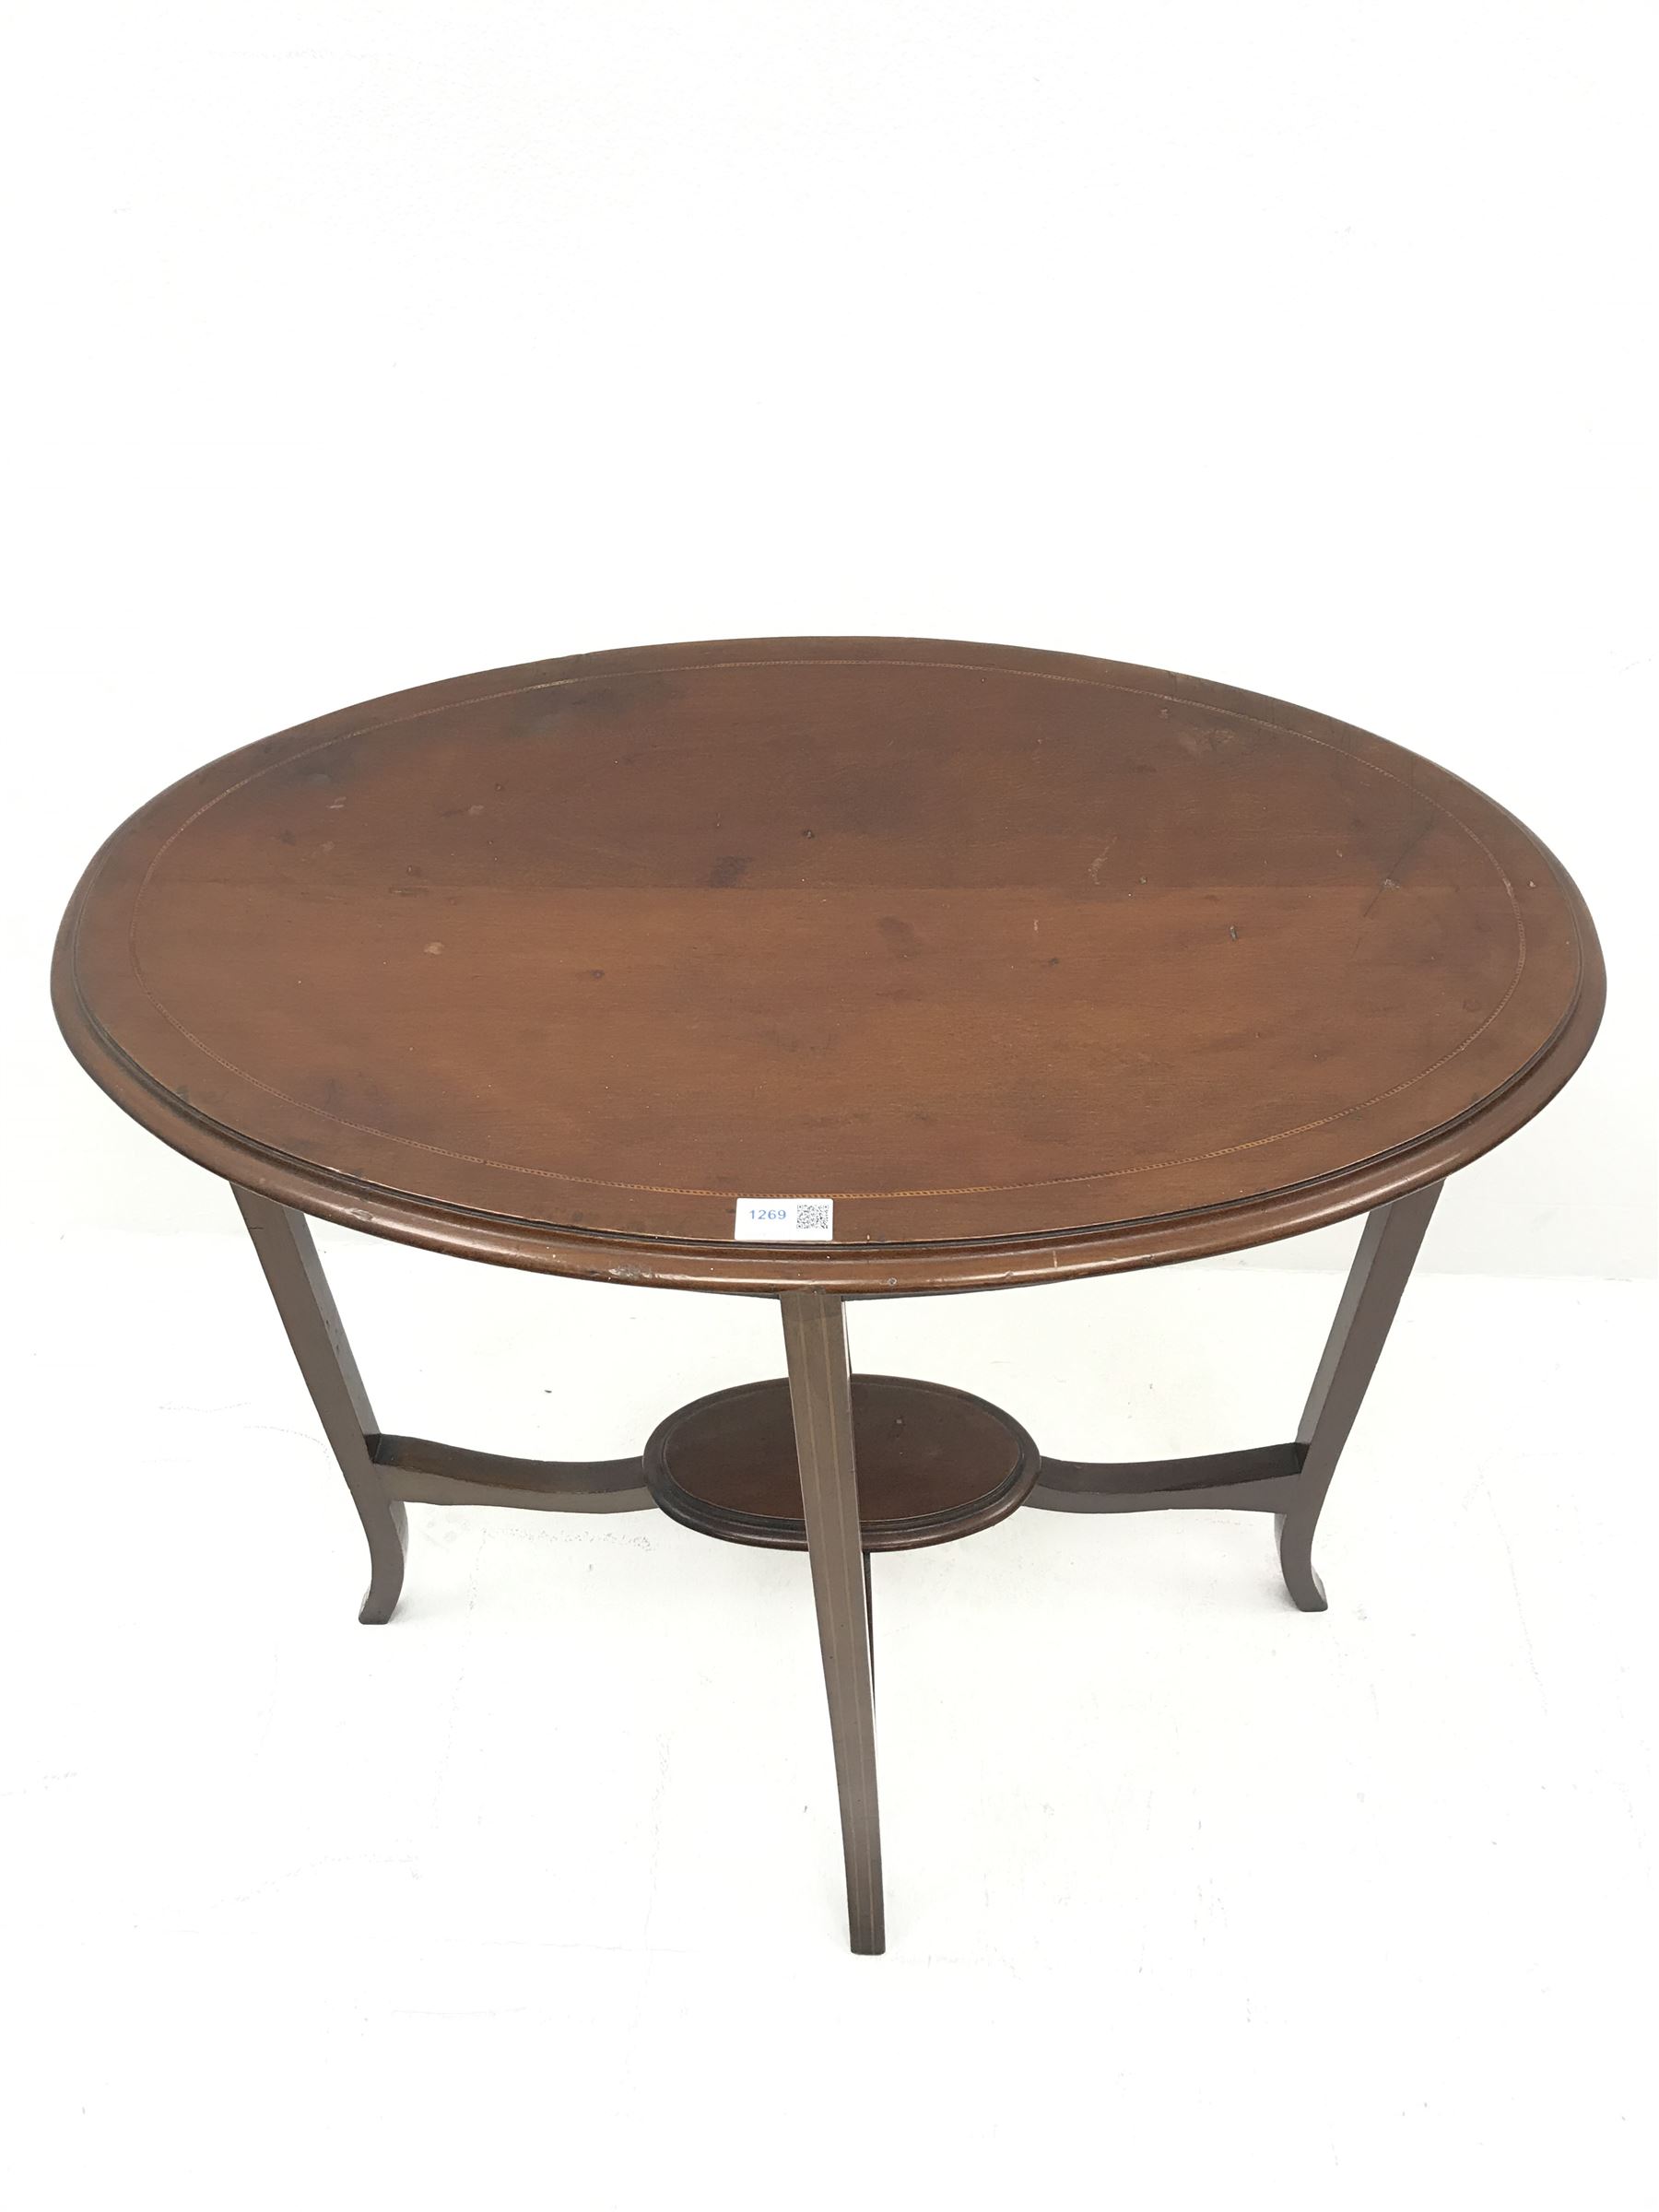 Edwardian inlaid mahogany oval occasional table - Image 2 of 3